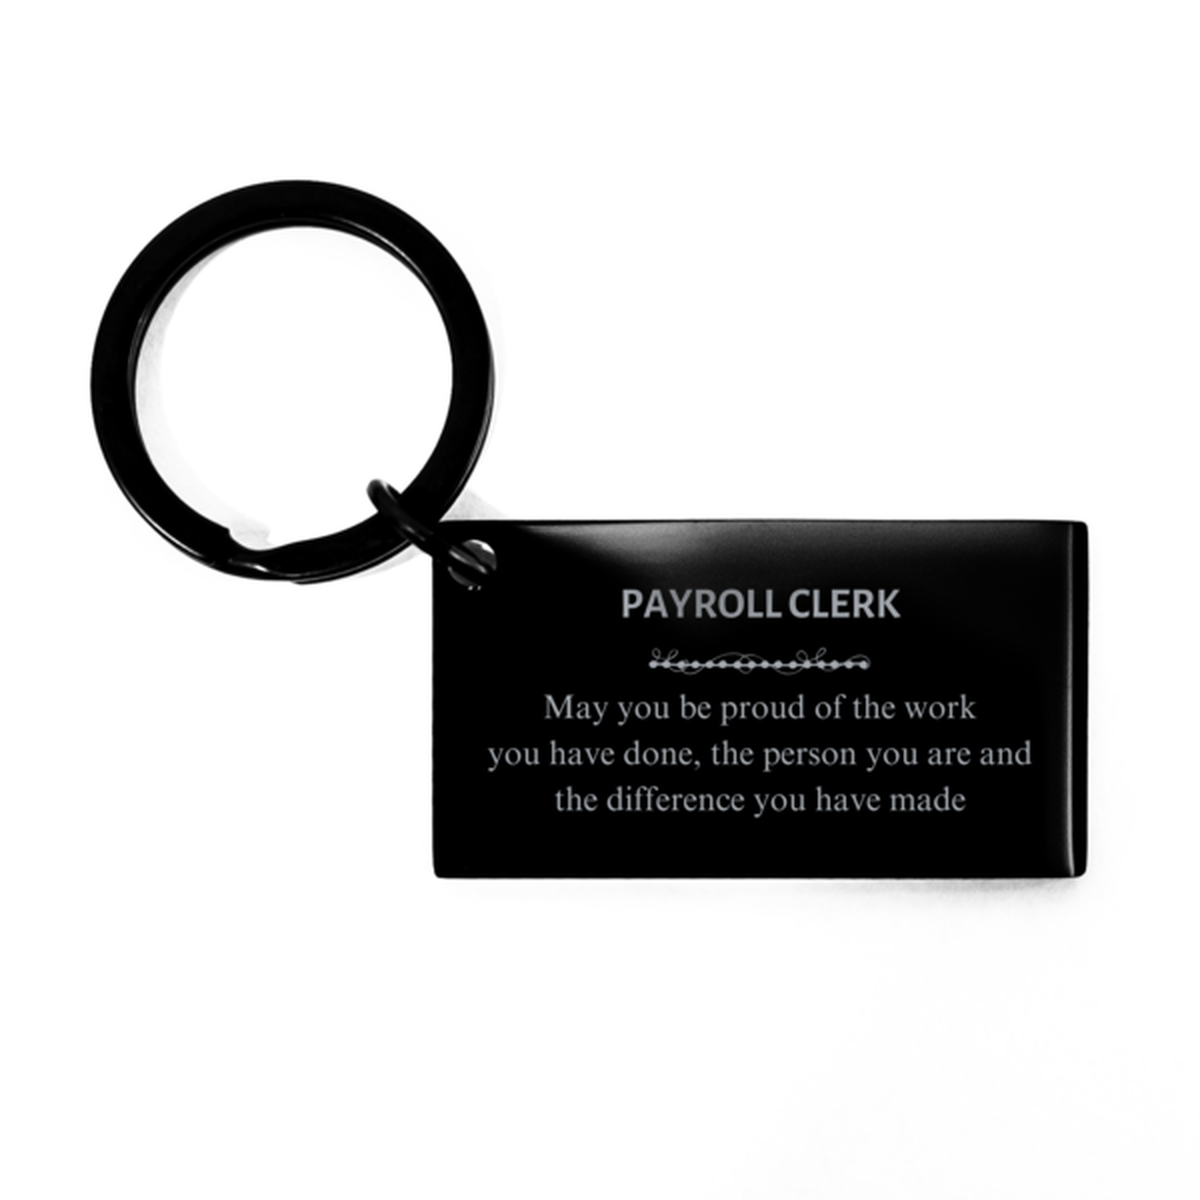 Radiation Therapist May you be proud of the work you have done, Retirement Payroll Clerk Keychain for Colleague Appreciation Gifts Amazing for Payroll Clerk